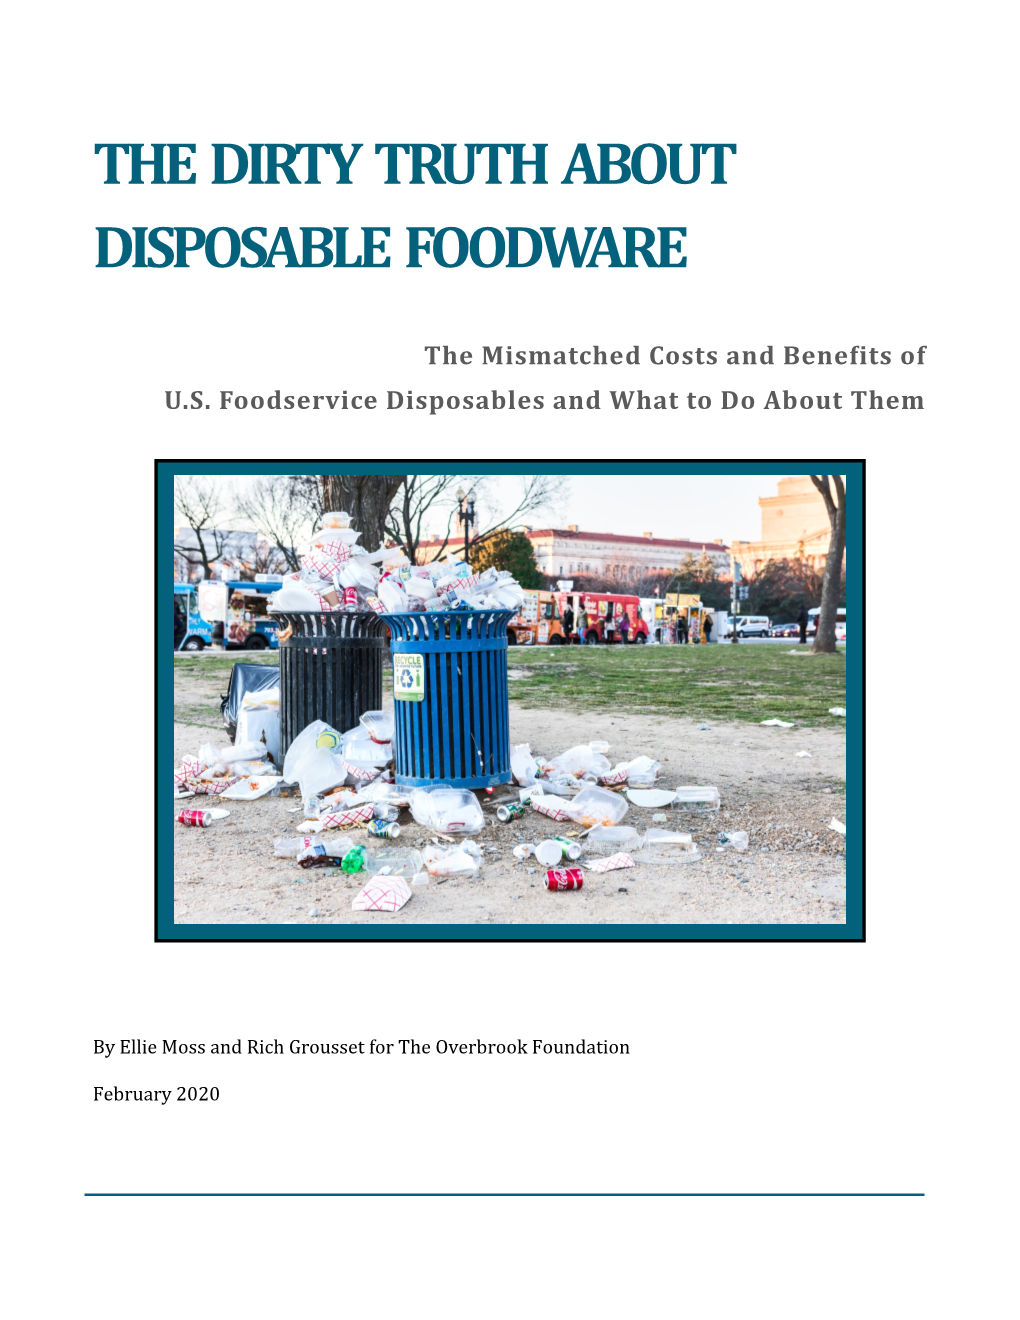 The Dirty Truth About Disposable Foodware